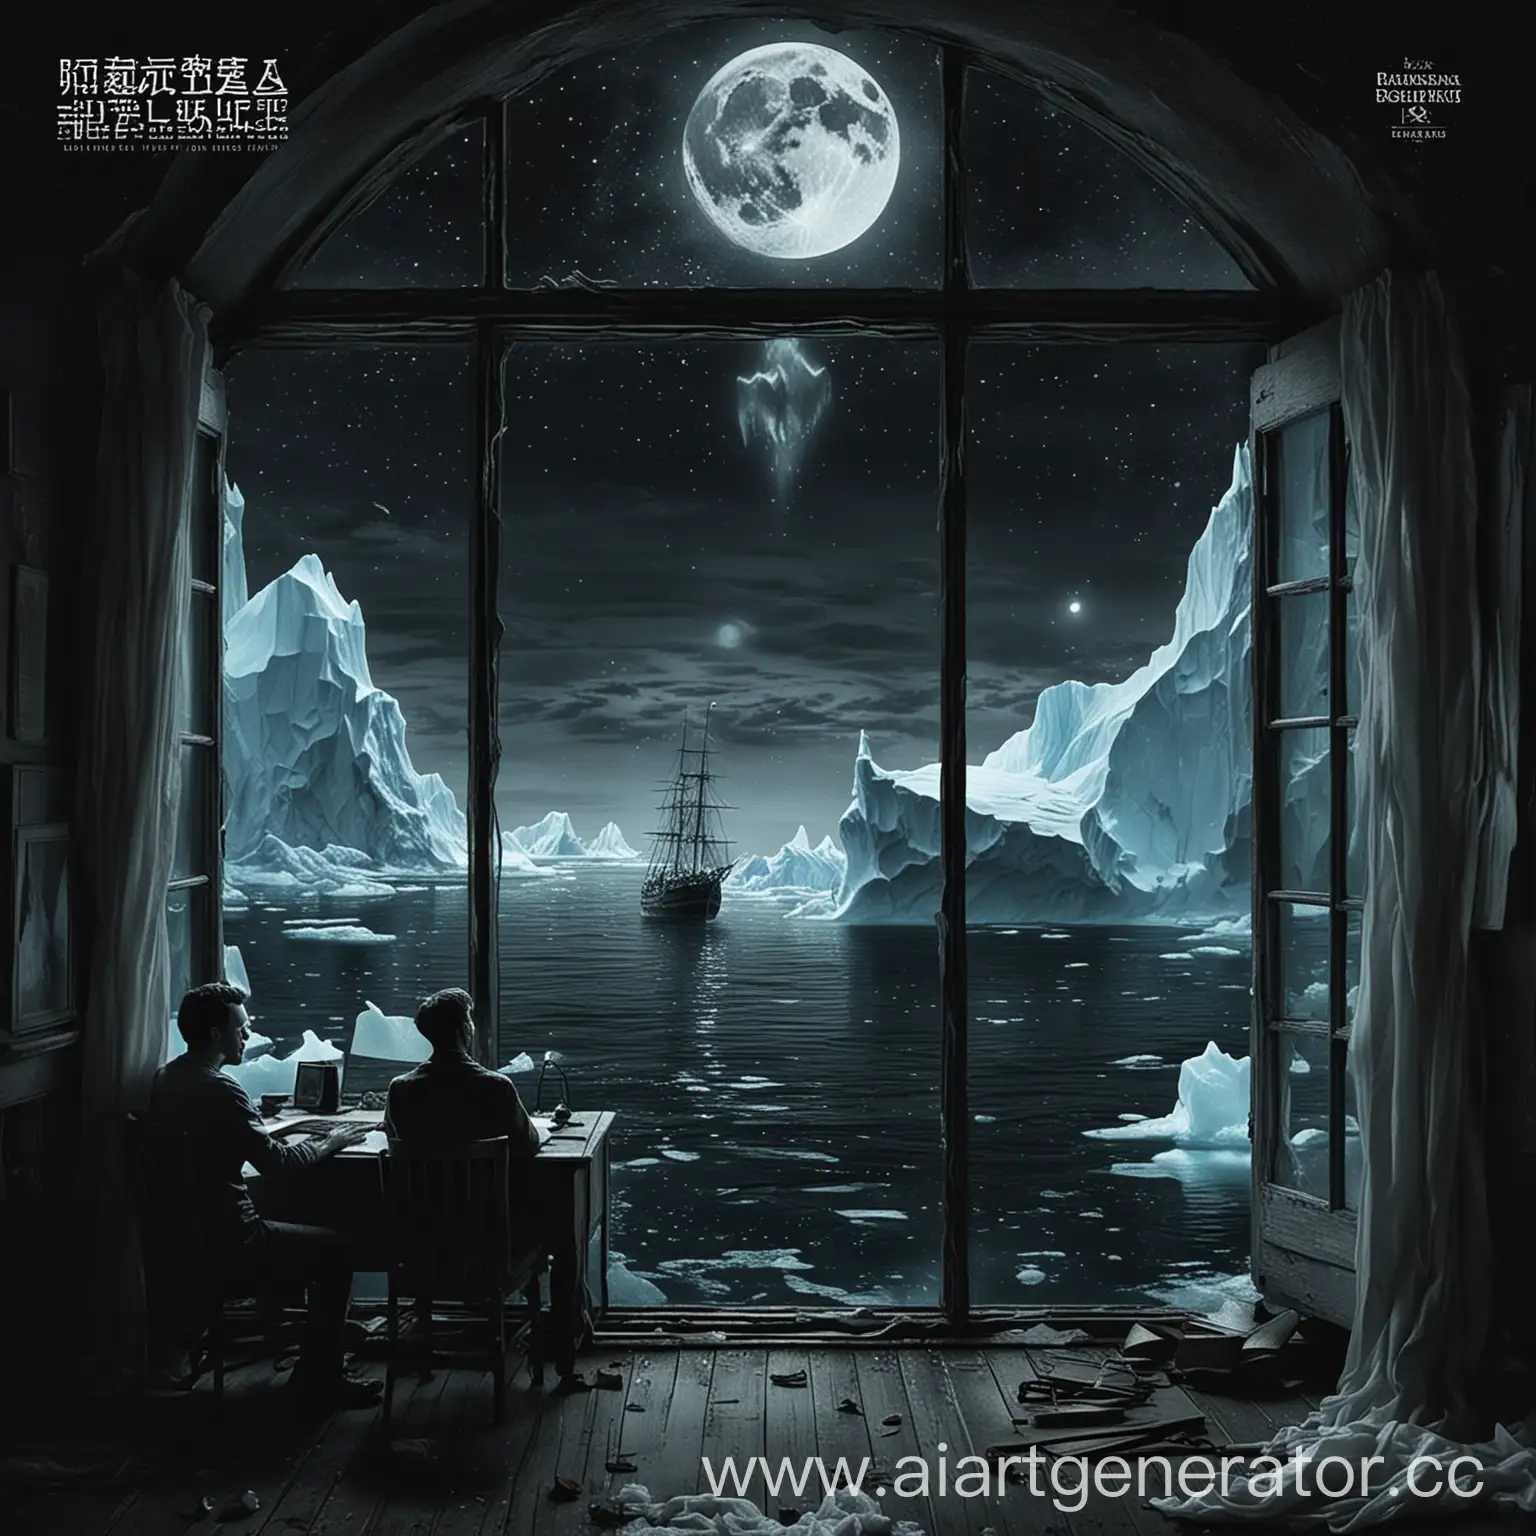 Man-in-Dark-Room-with-Ghosts-and-Sailing-Ship-towards-Iceberg